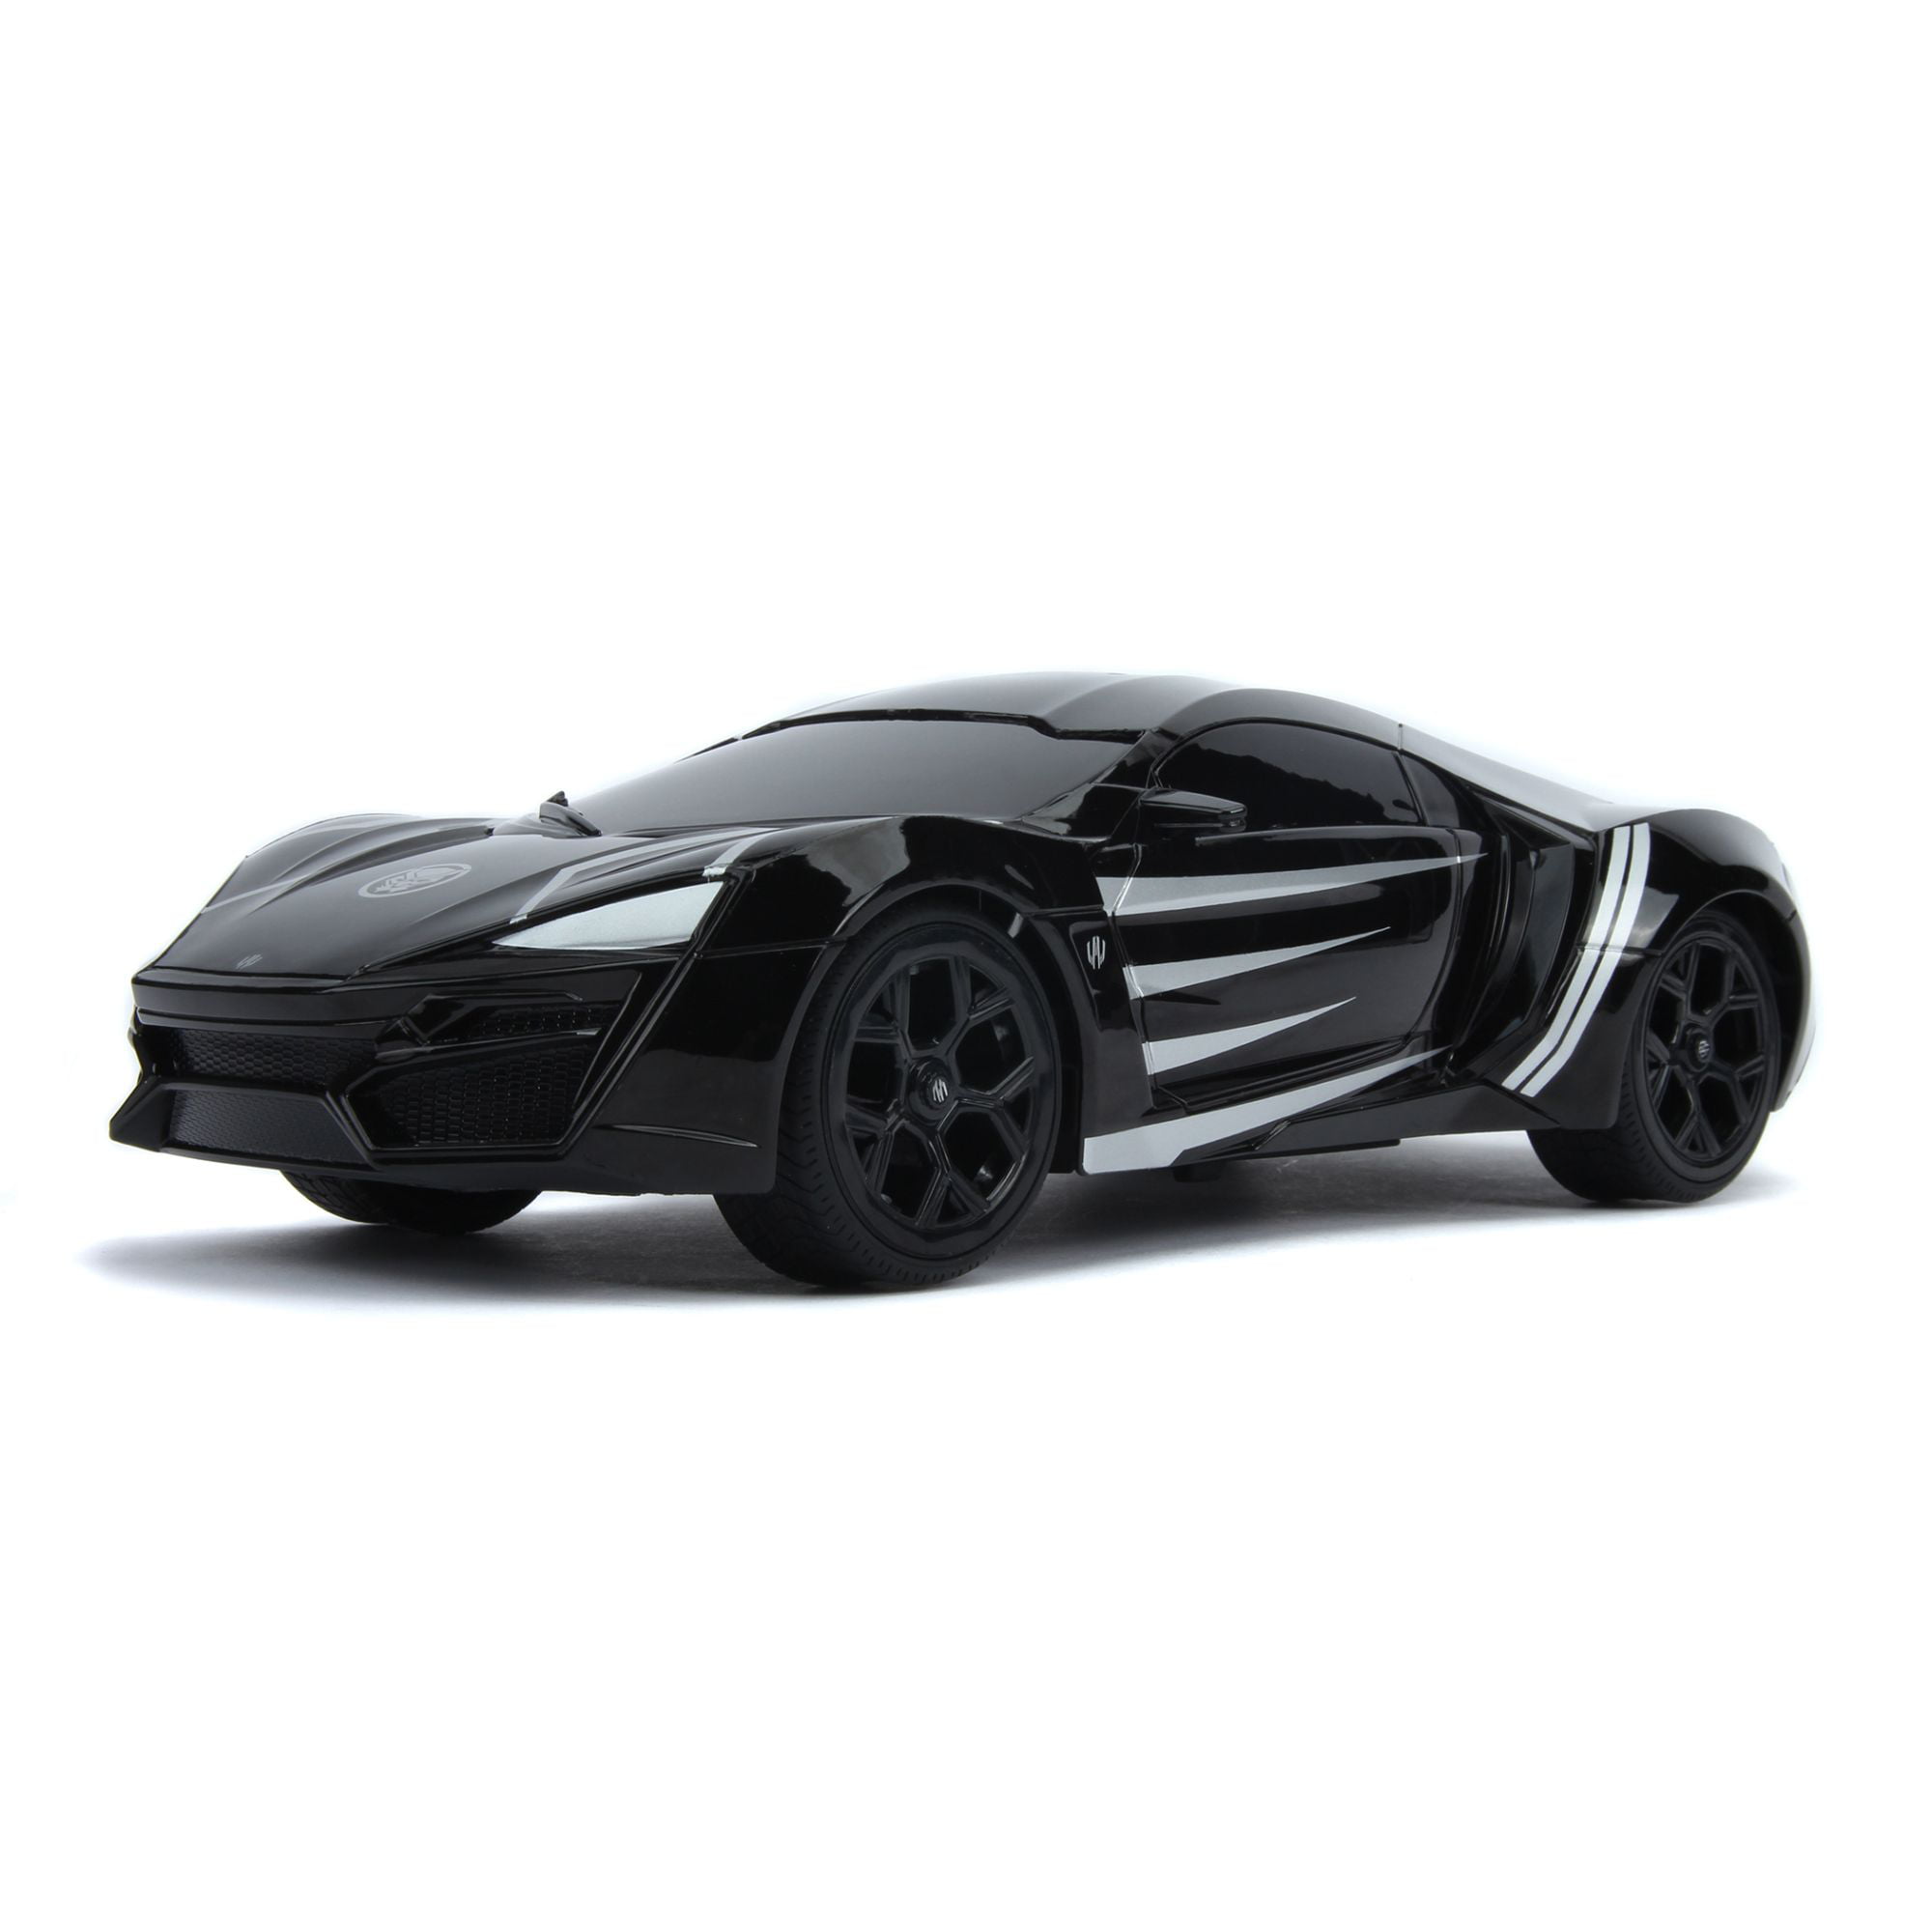 Marvel Black Panther 1:16 Lykan Hypersport RC Radio Control Cars Toys for Kids and Adults 